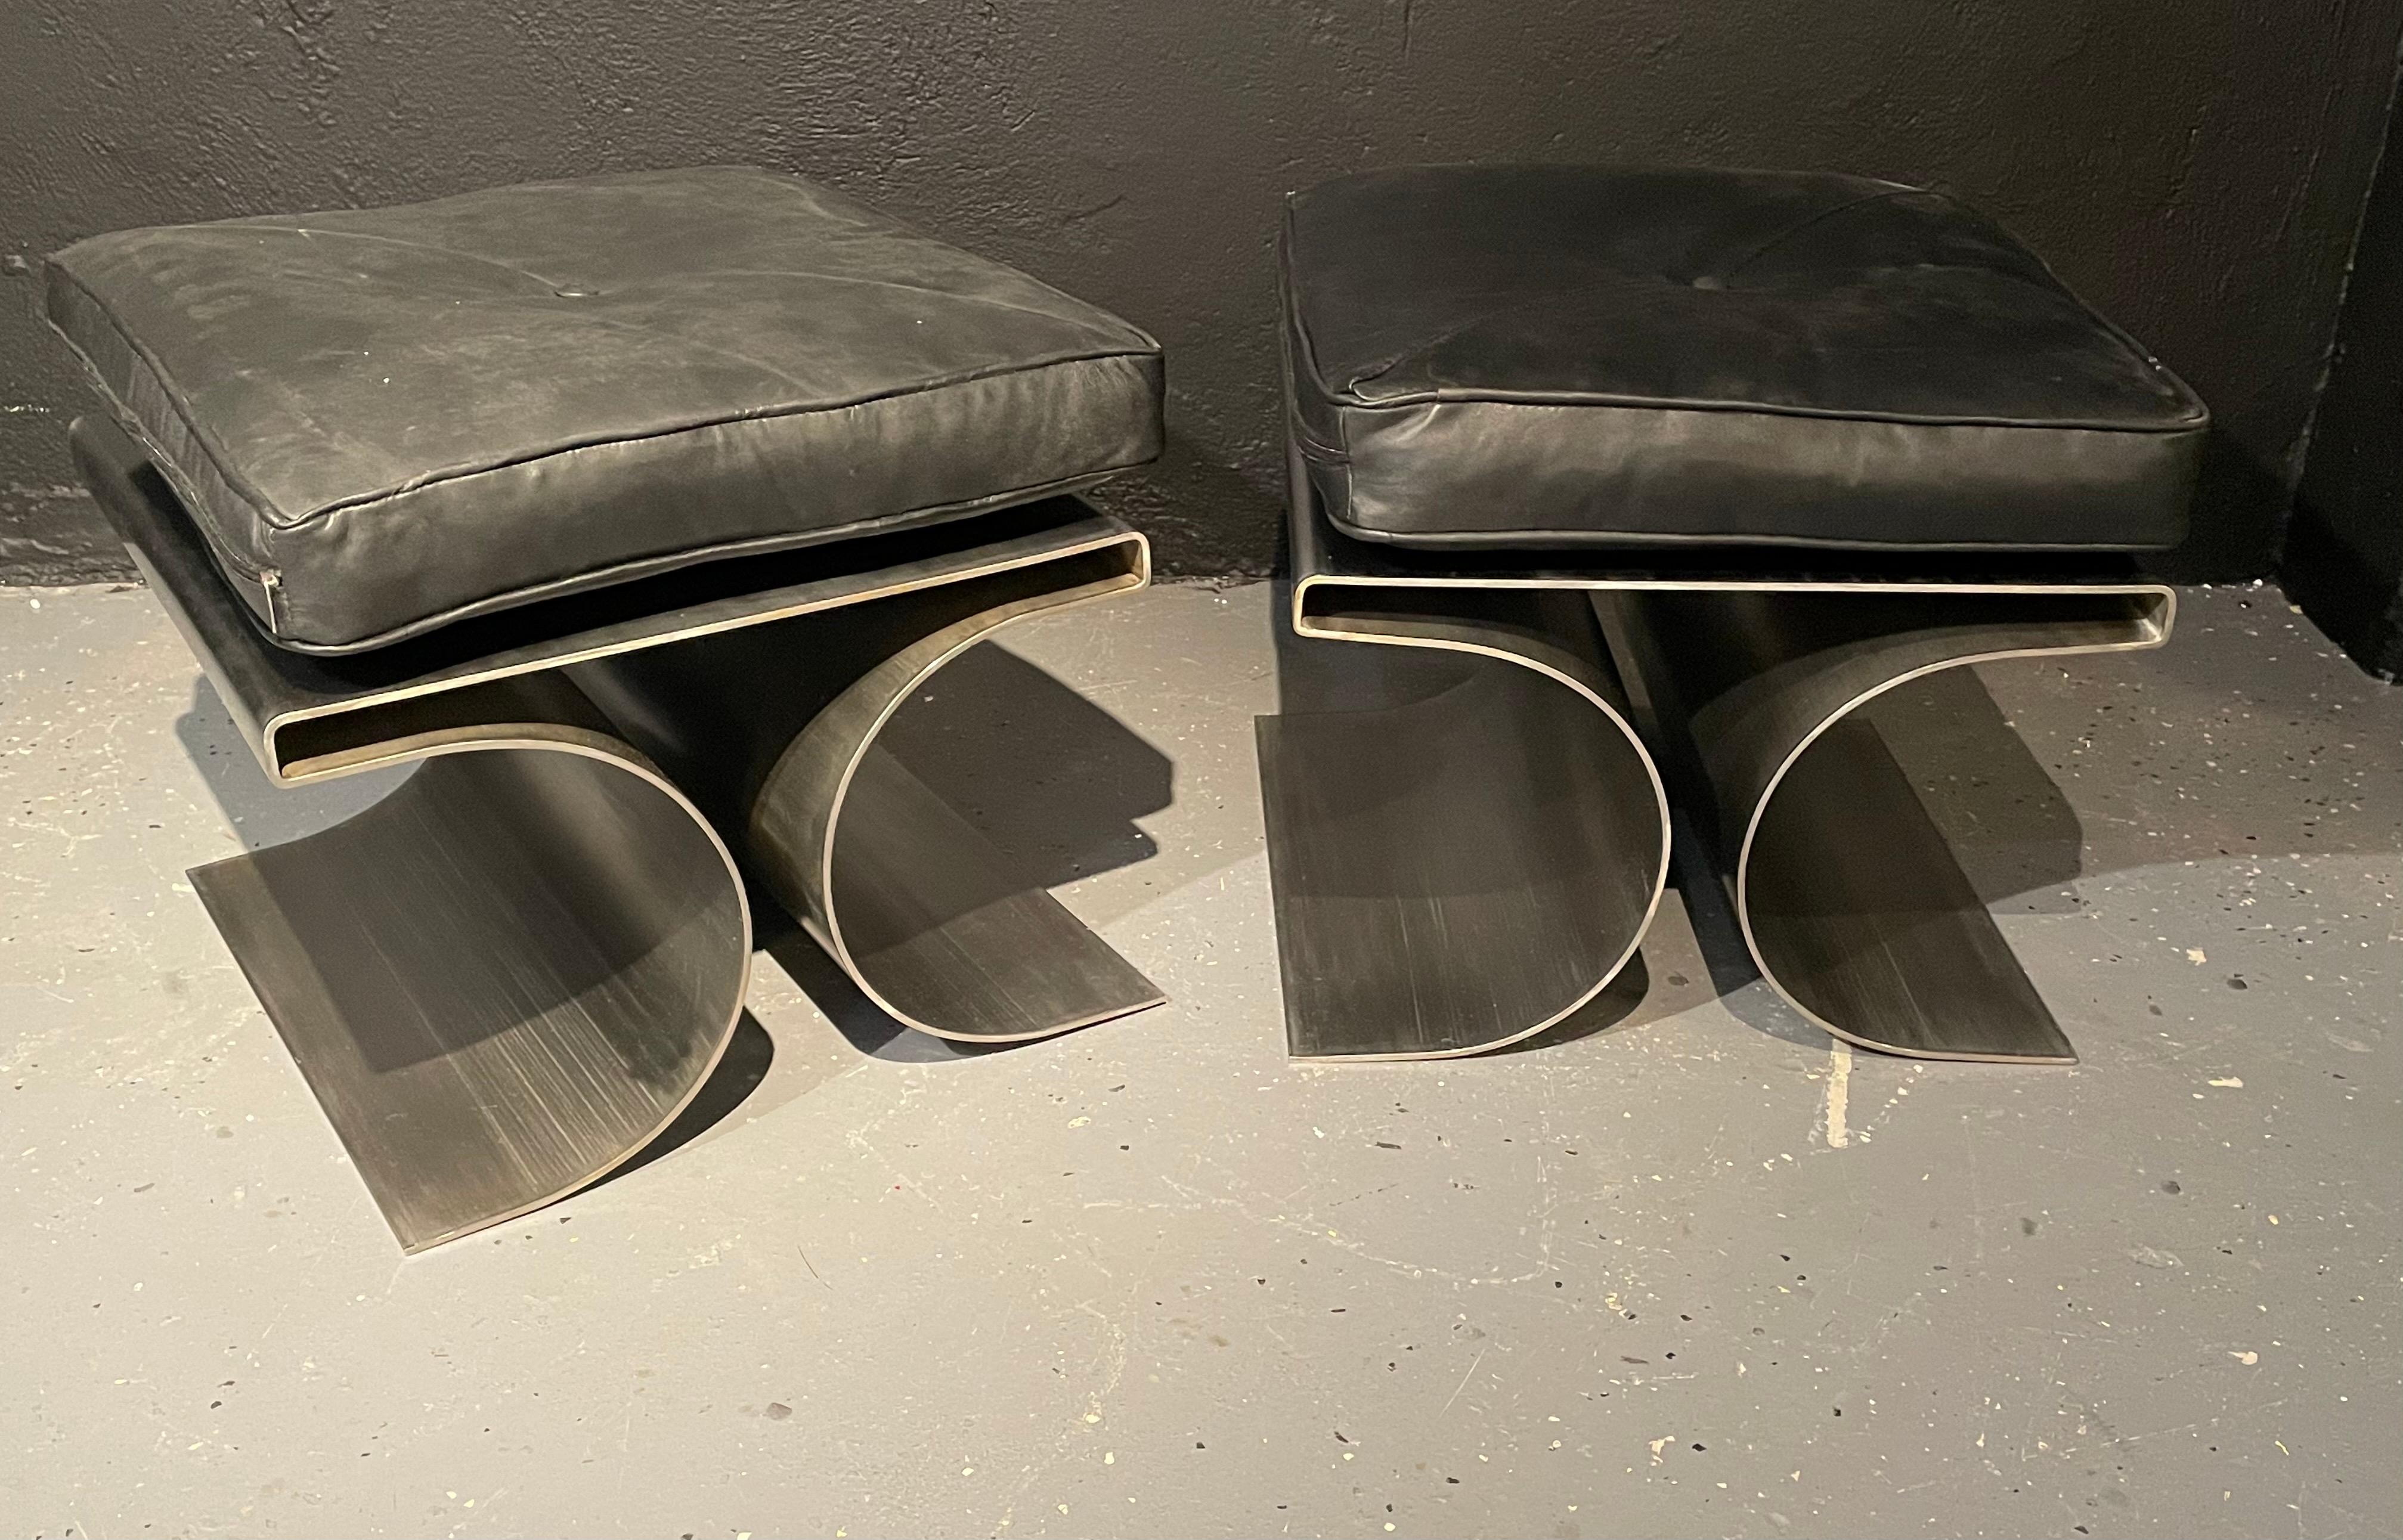 Pair of Michel Boyer Style Rouve Edition 'X' stools in a brushed stainless steel with a black leather cushion. These impressive Mid-Century Modern benches are simply stunning. The strong heavy and sturdy bases having the 'X' form with a flat top